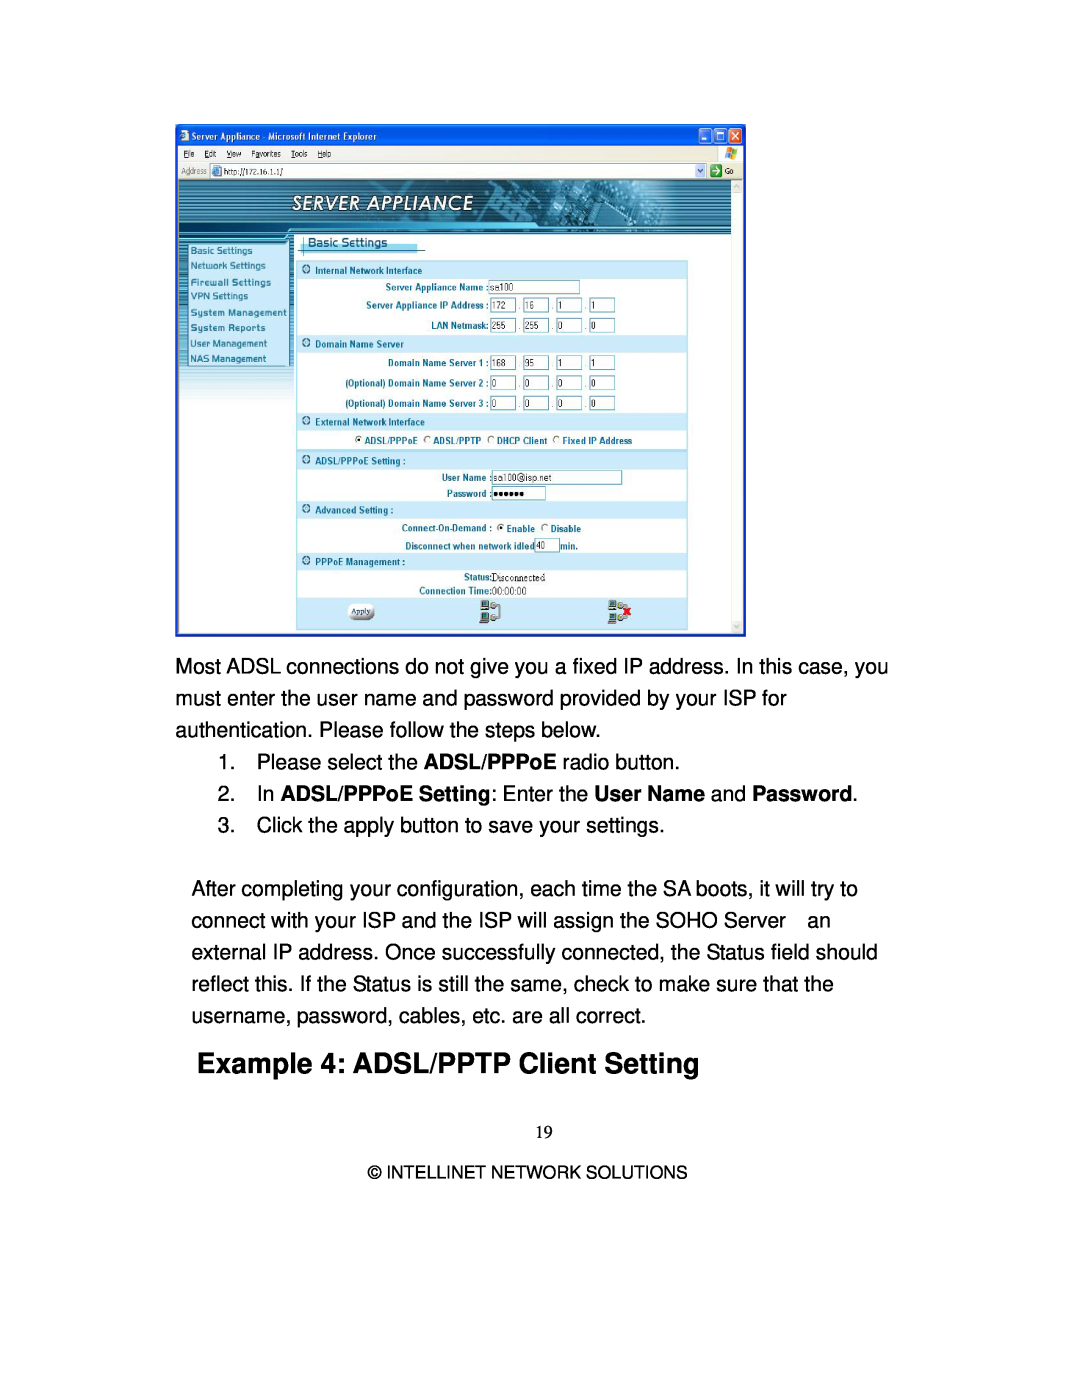 Intellinet Network Solutions 501705 manual Example 4 ADSL/PPTP Client Setting 